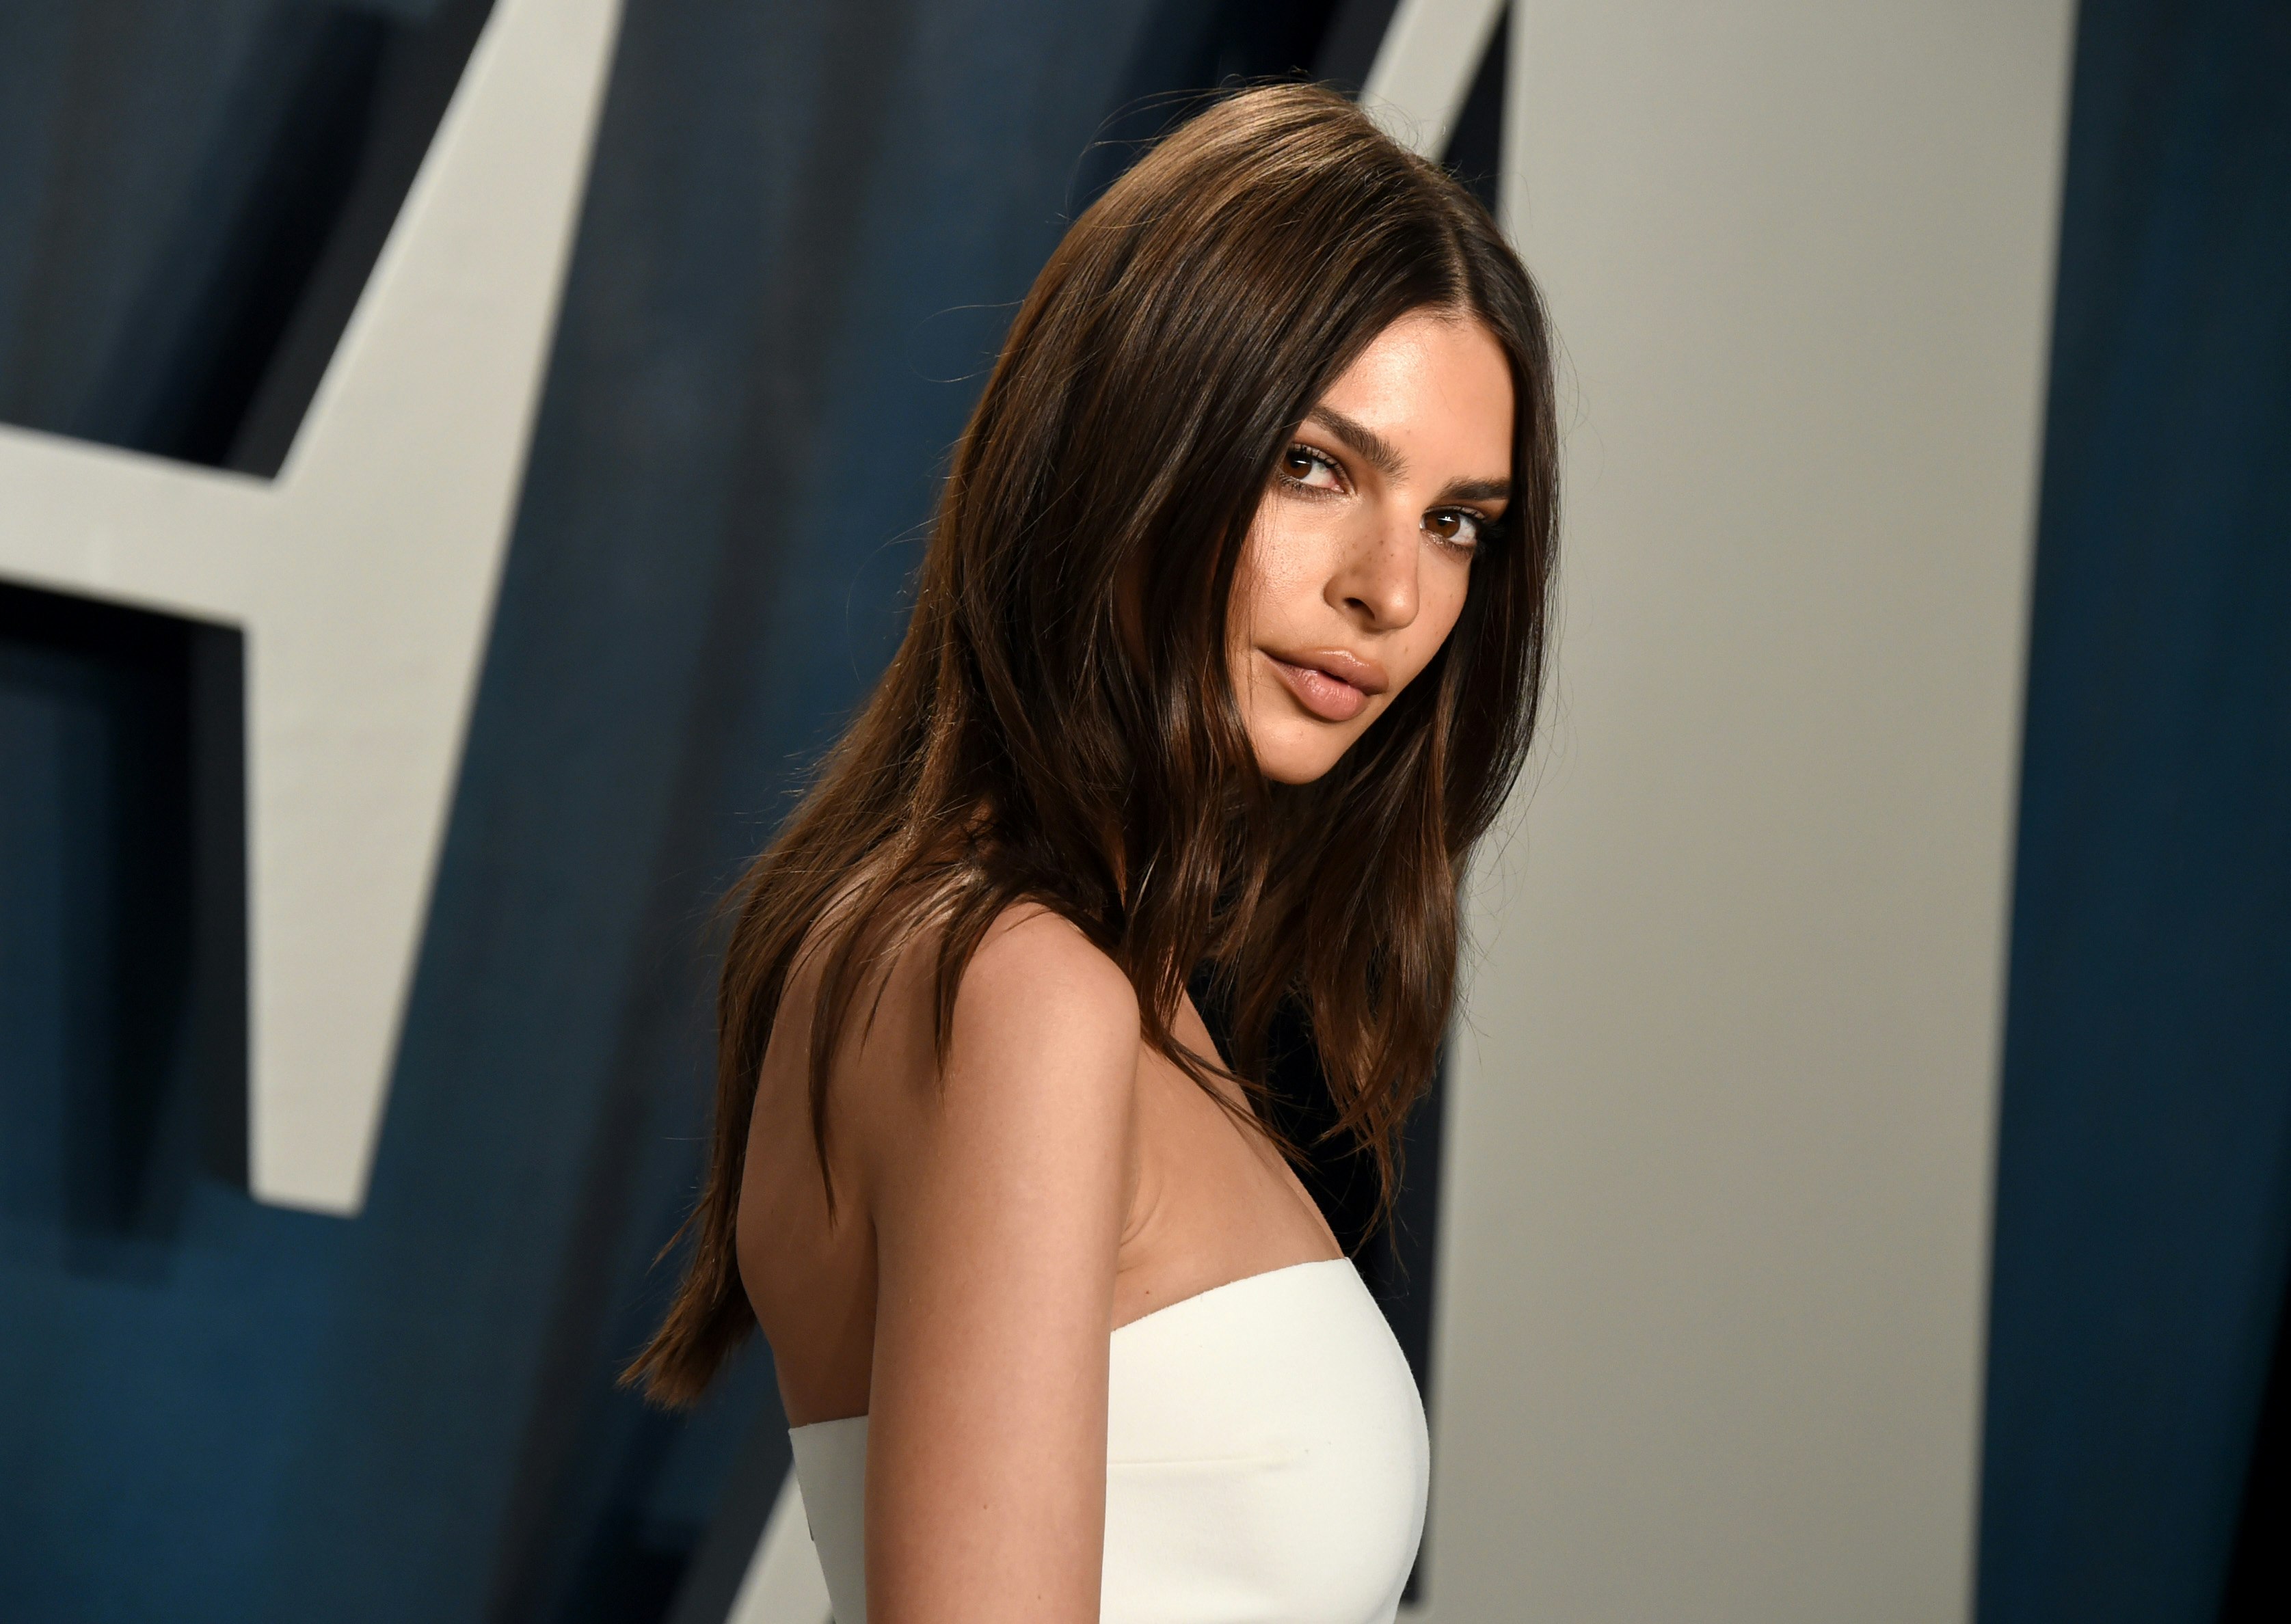 Emily Ratajkowski Claims the Fashion Industry Doesn't Like Her Boobs